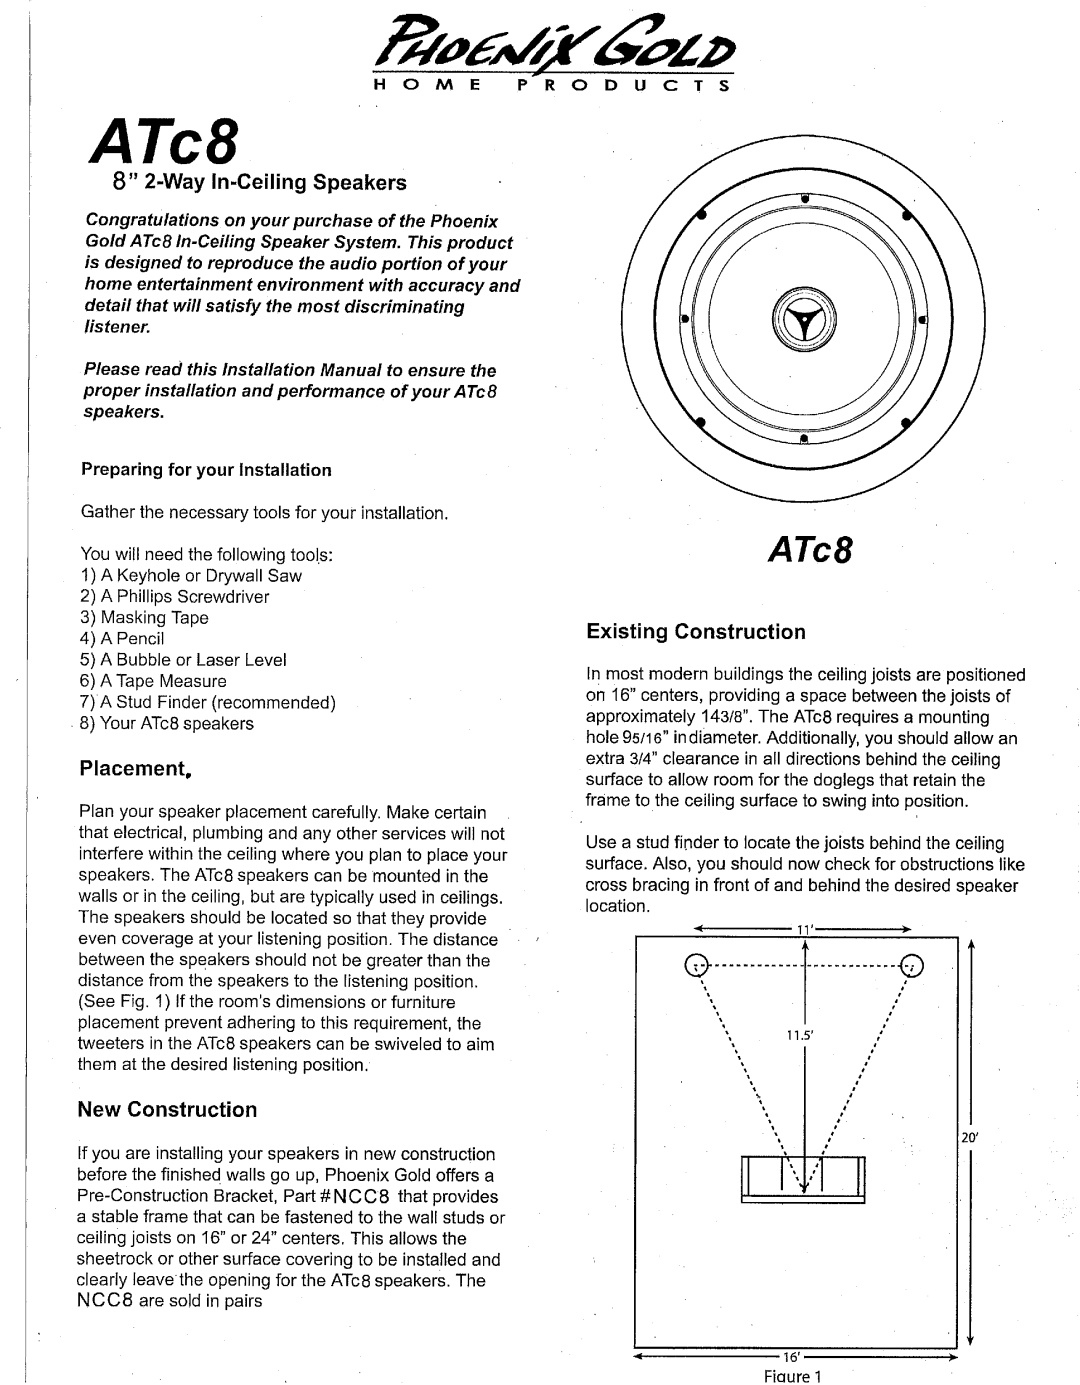 Phoenix Gold ATc8 installation manual 8” 2-Way In-CeilingSpeakers, Preparing for your Installation, Placement 